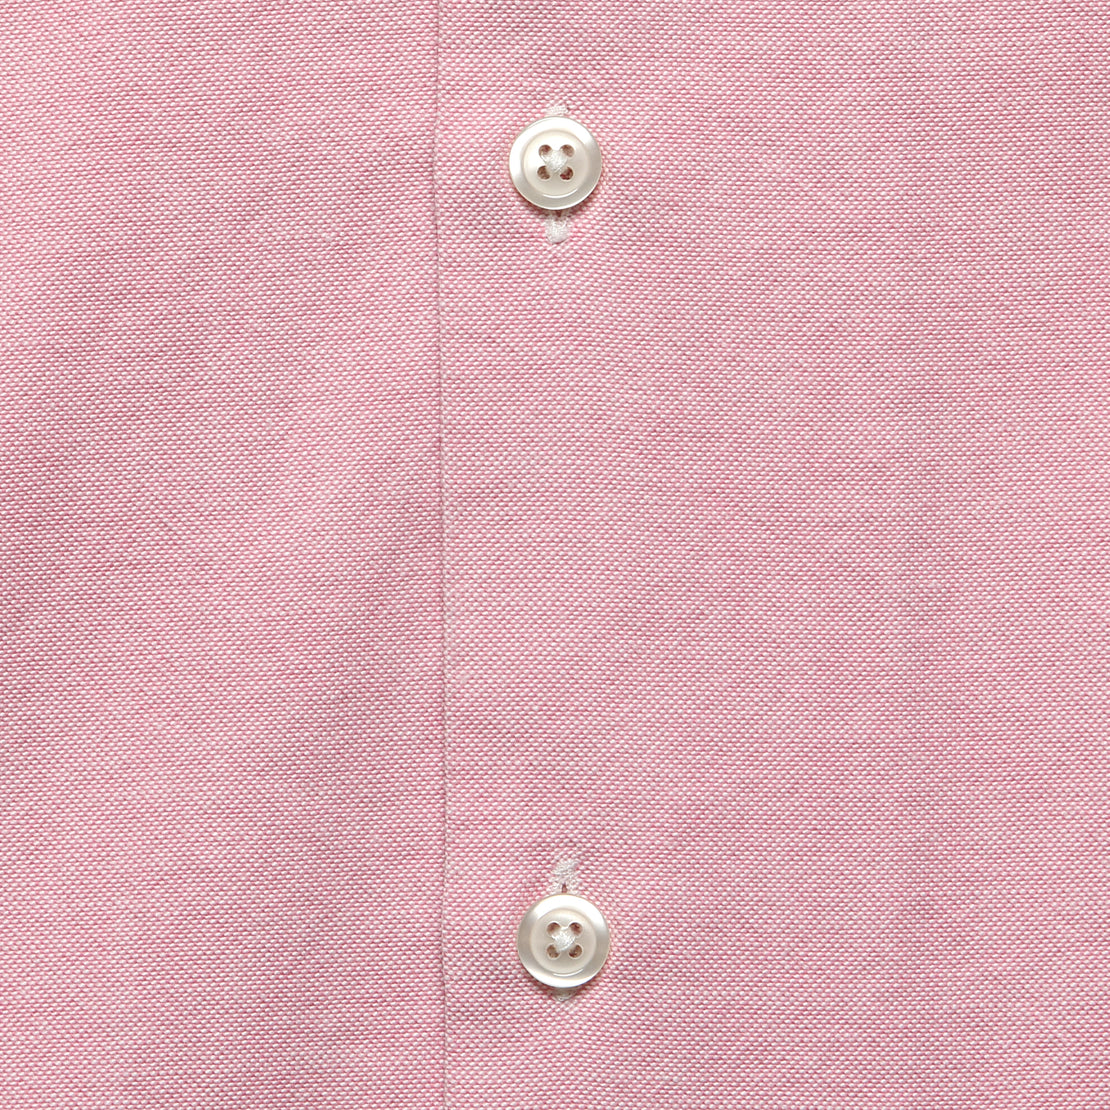 Oxford Road Shirt - Pink - Universal Works - STAG Provisions - Tops - S/S Woven - Solid